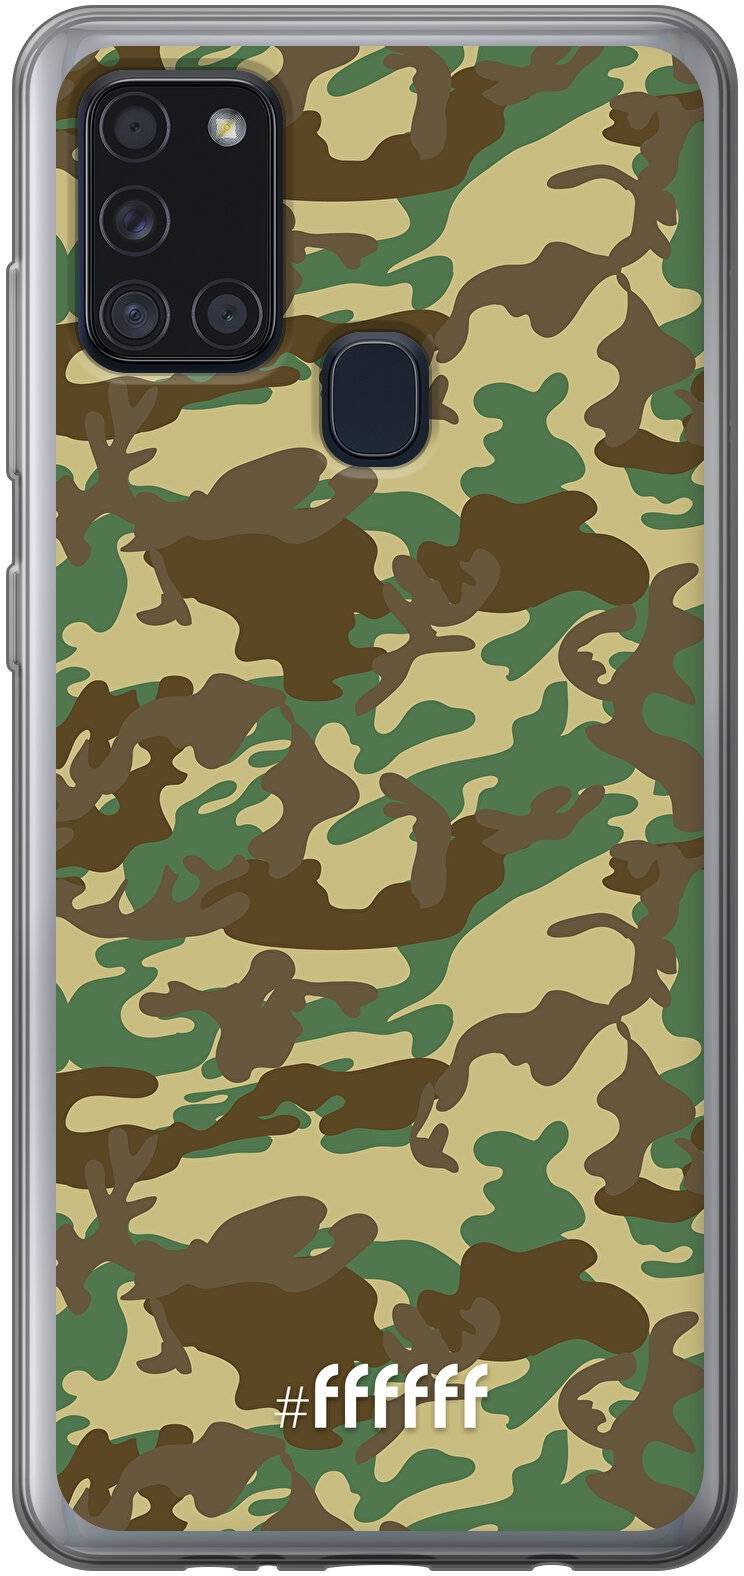 Jungle Camouflage Galaxy A21s